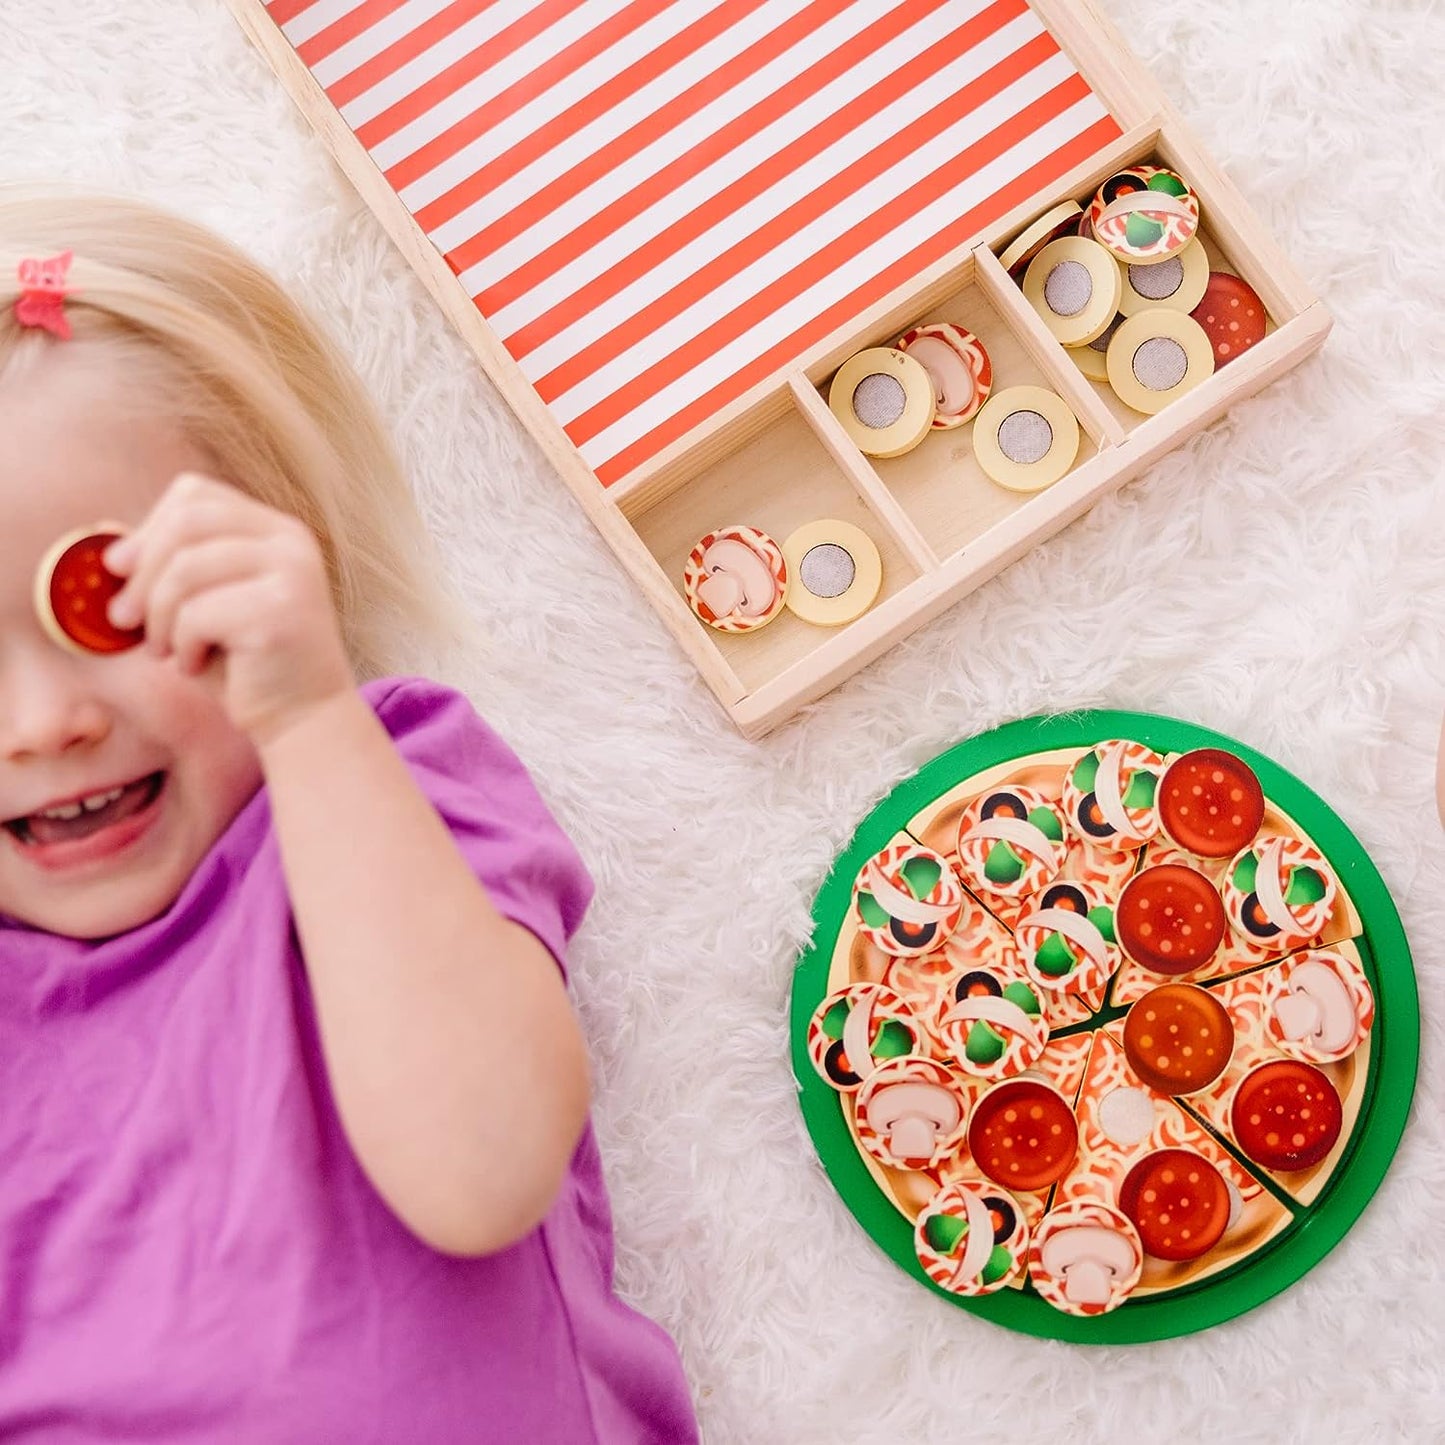 Wooden Pizza Play Food Set